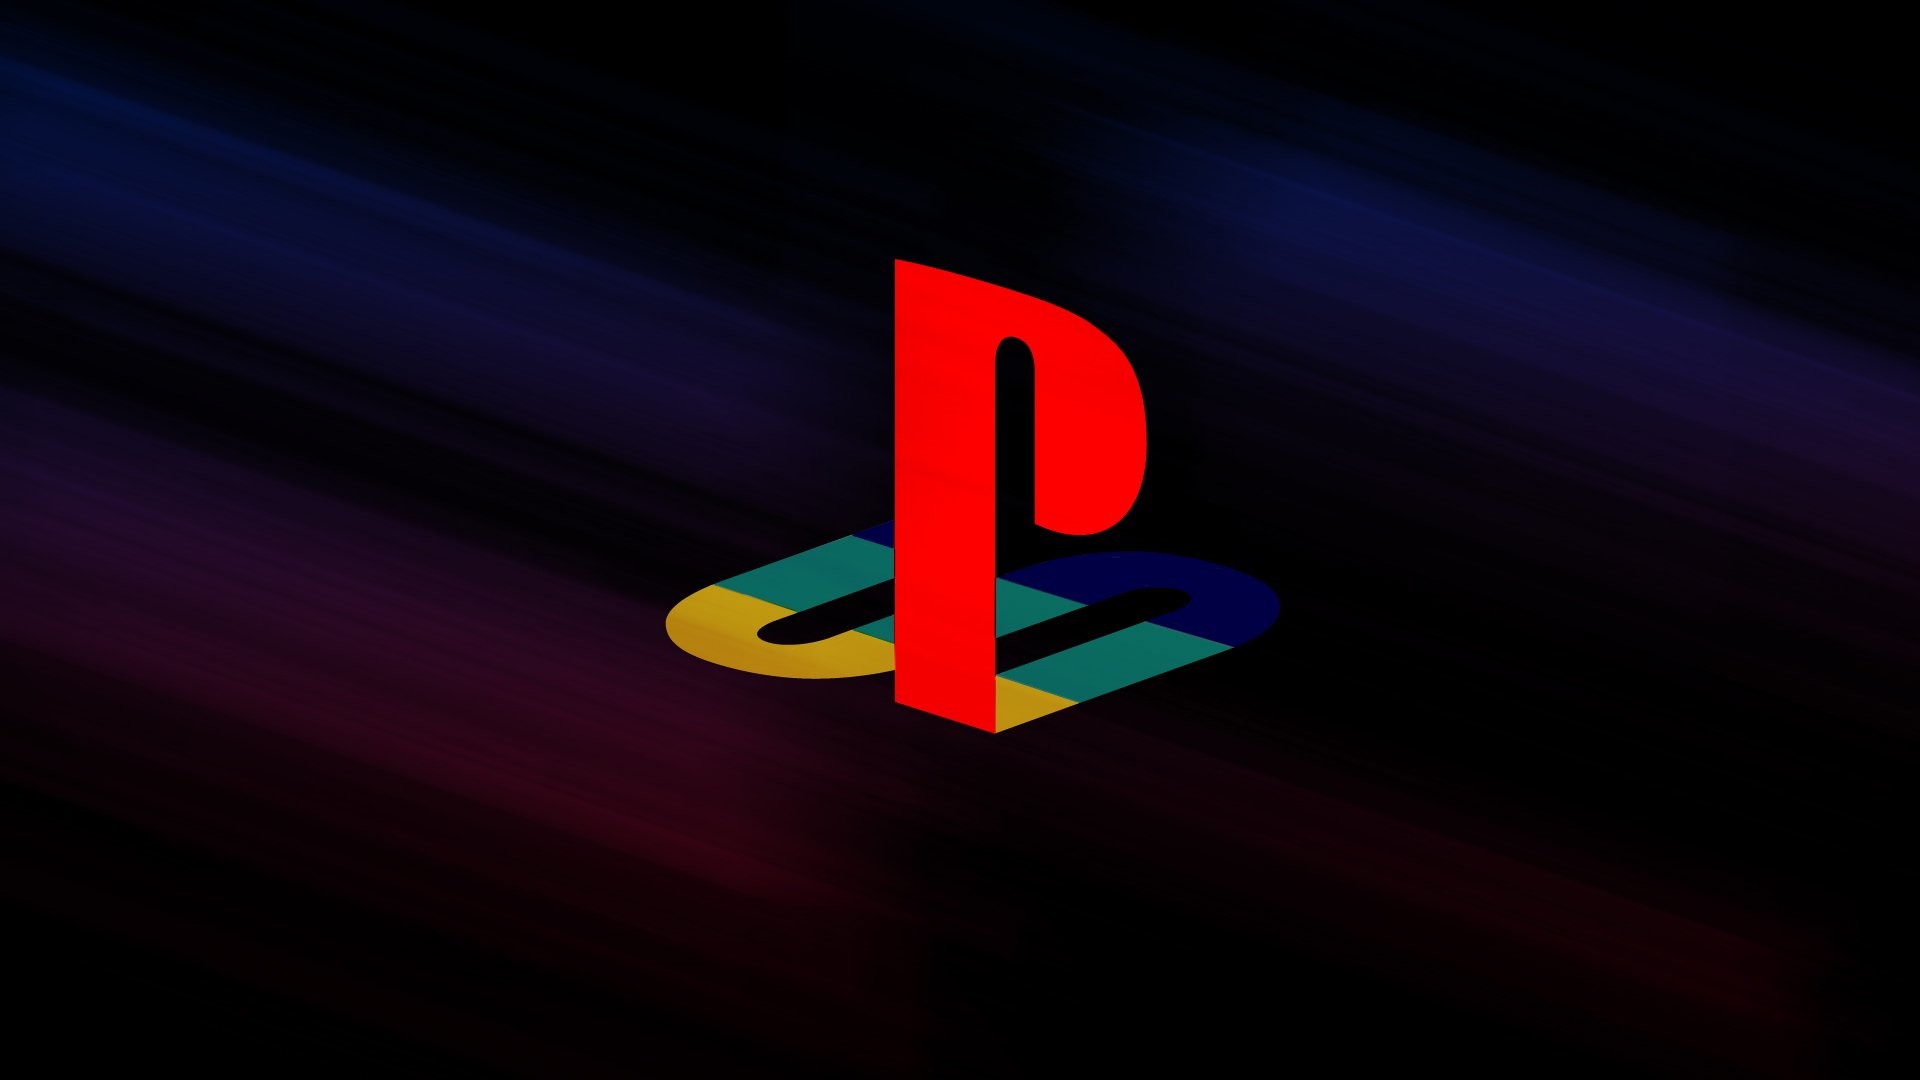 1920x1080 Today the PlayStation brand turns 15 years old along with the brand's  iconic "PS" logo. However, that logo wasn't the original concept for  PlayStation.